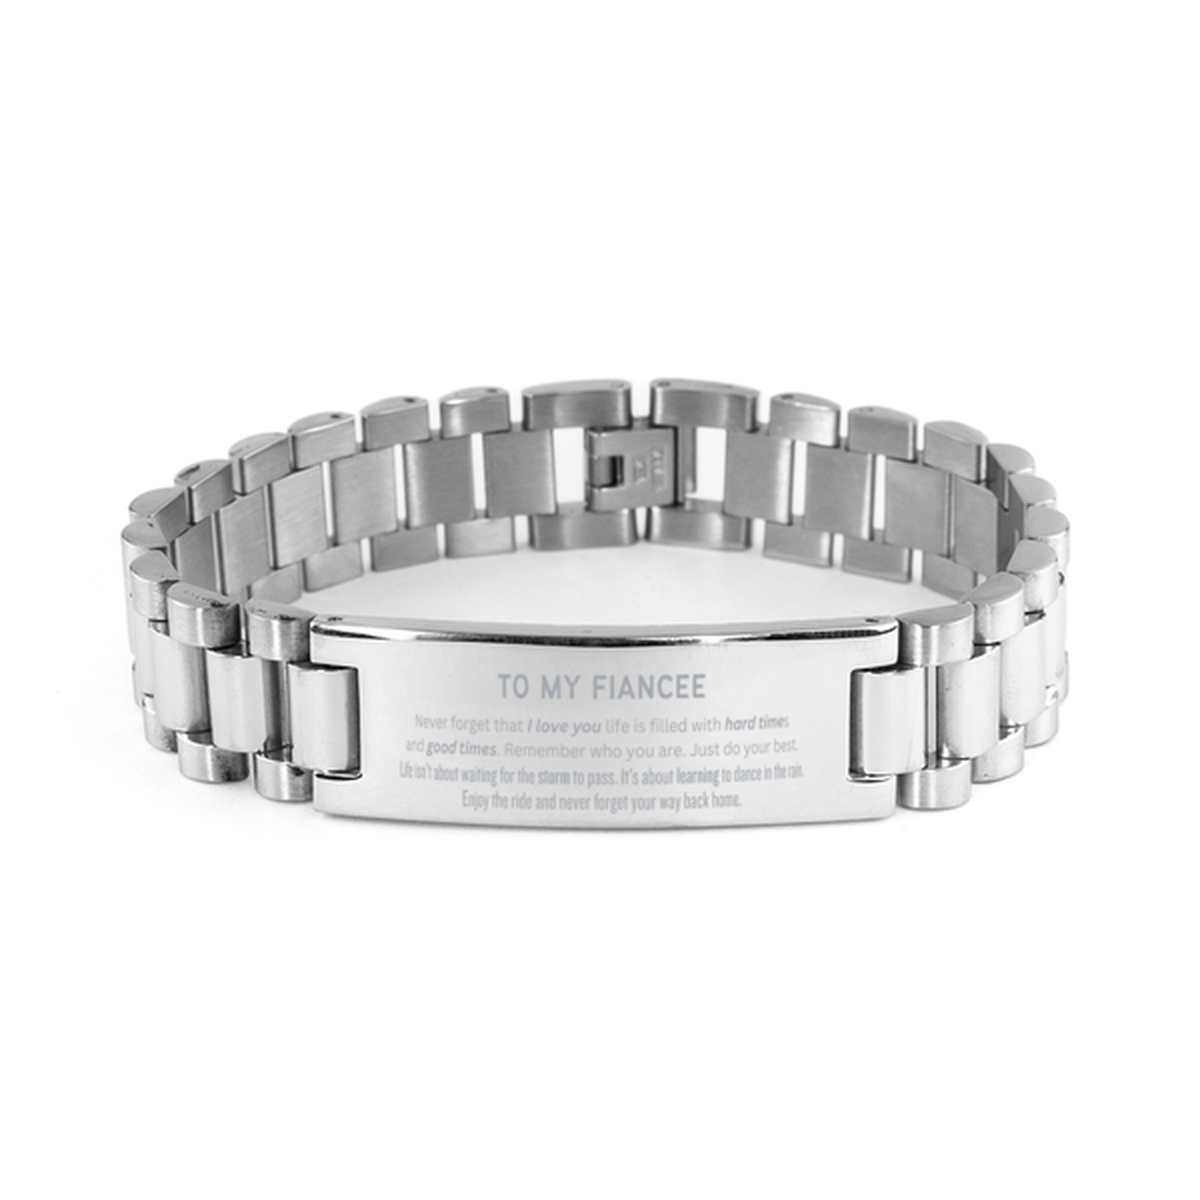 Christmas Fiancee Ladder Stainless Steel Bracelet Gifts, To My Fiancee Birthday Thank You Gifts For Fiancee, Graduation Unique Gifts For Fiancee To My Fiancee Never forget that I love you life is filled with hard times and good times. Remember who you are